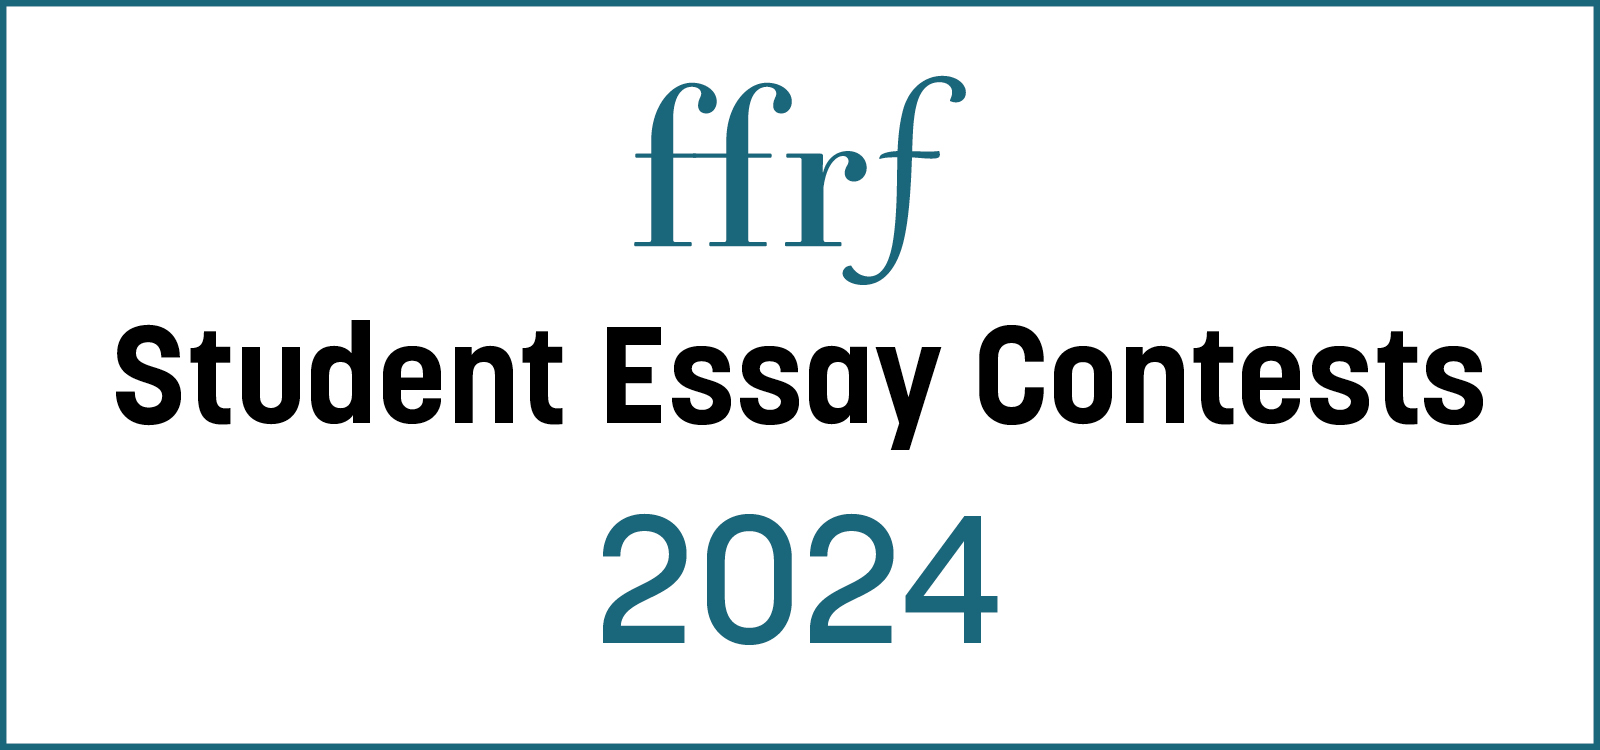 FFRF Student Essay Contests 2024